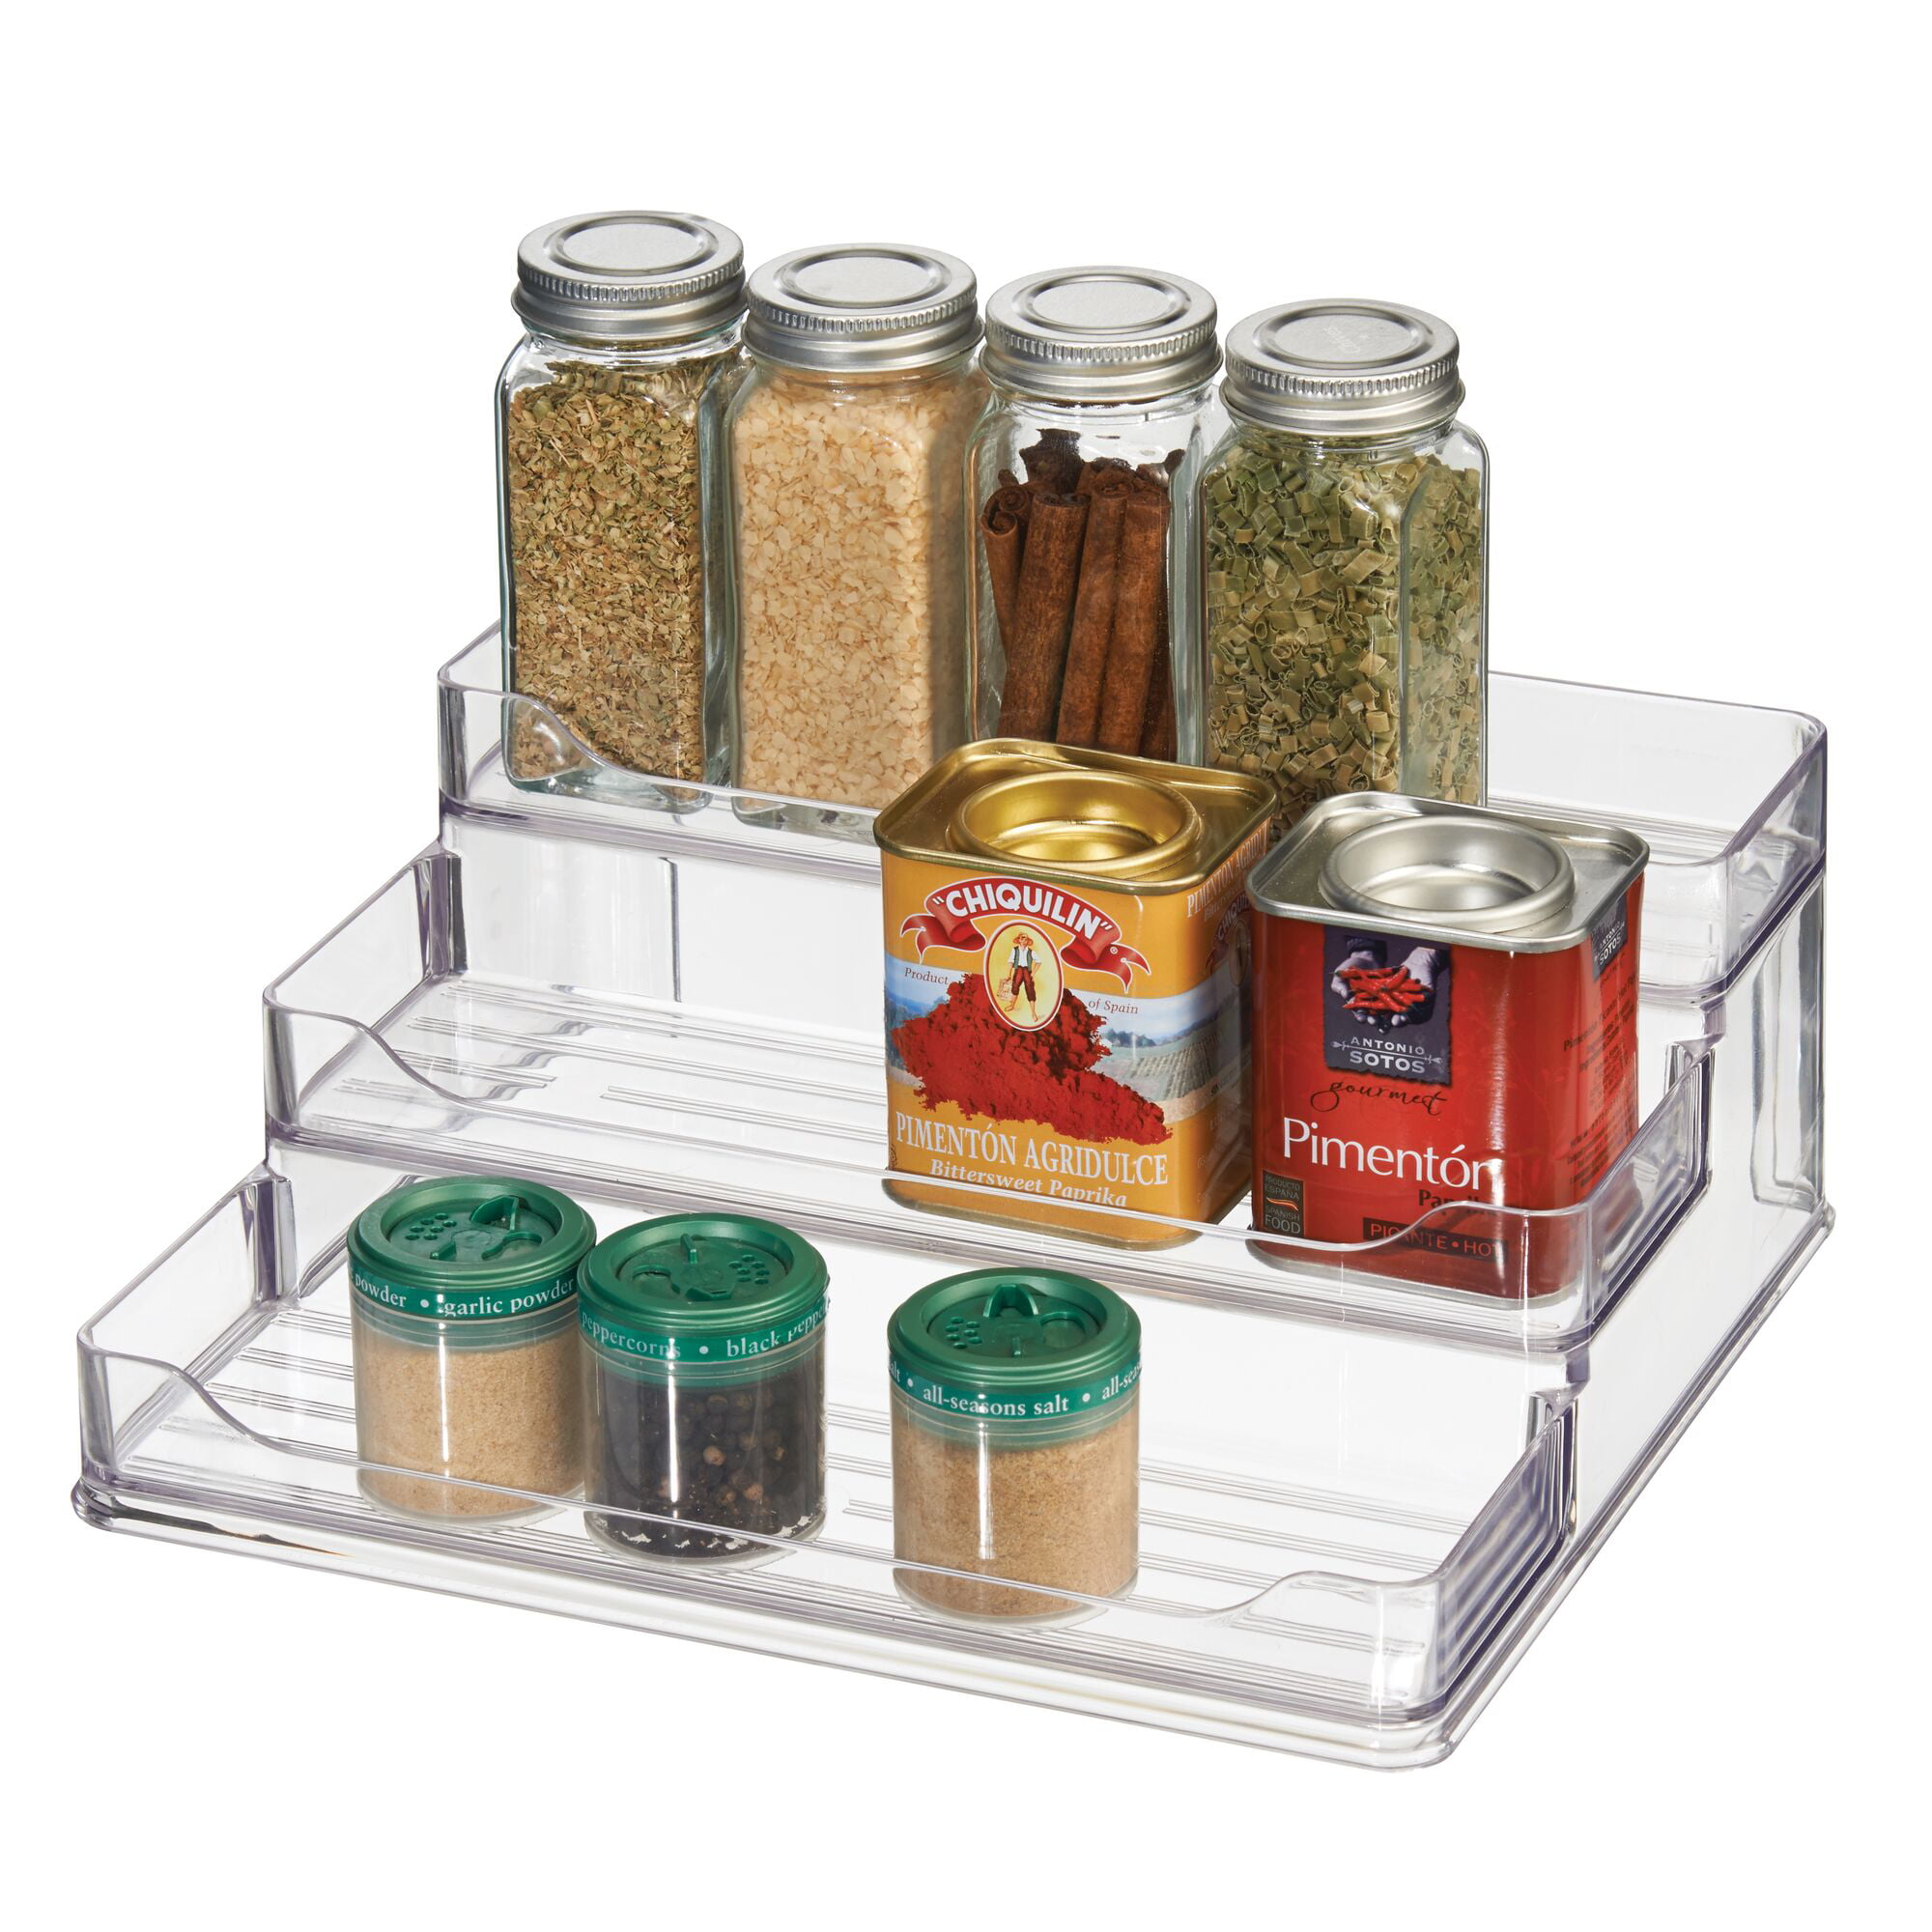  mDesign Expandable Plastic Deluxe Spice Rack, Drawer Organizer  for Kitchen Cabinet Drawers, 3 Tier Slanted for Spice Jars, Food Seasoning  Bottle Storage, Ligne Collection - Clear: Home & Kitchen